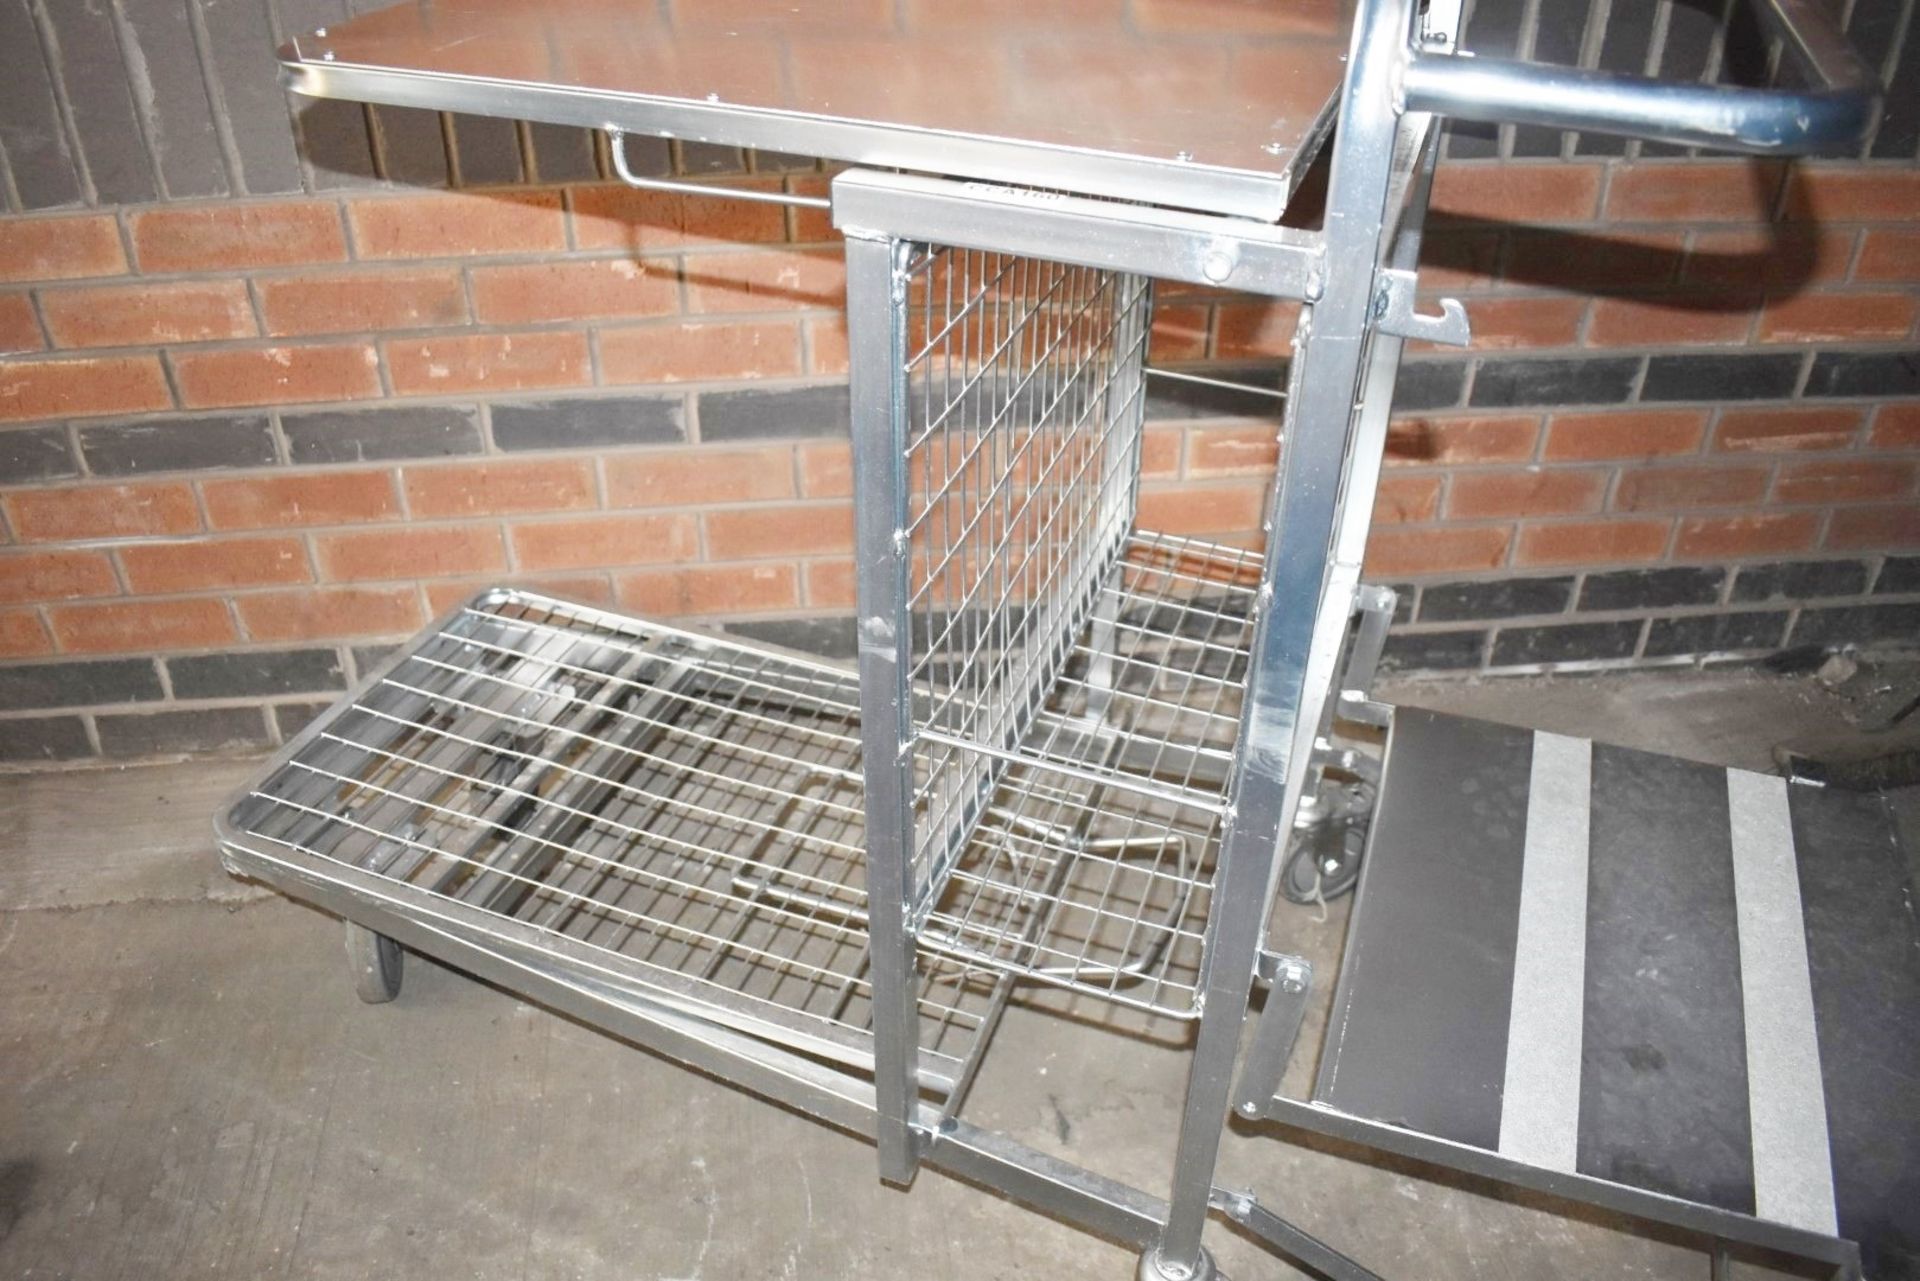 1 x Supermarket Retail Merchandising Trolley With Pull Out Step and Folding Shelf - CL595 - Ref: CCA - Image 7 of 9